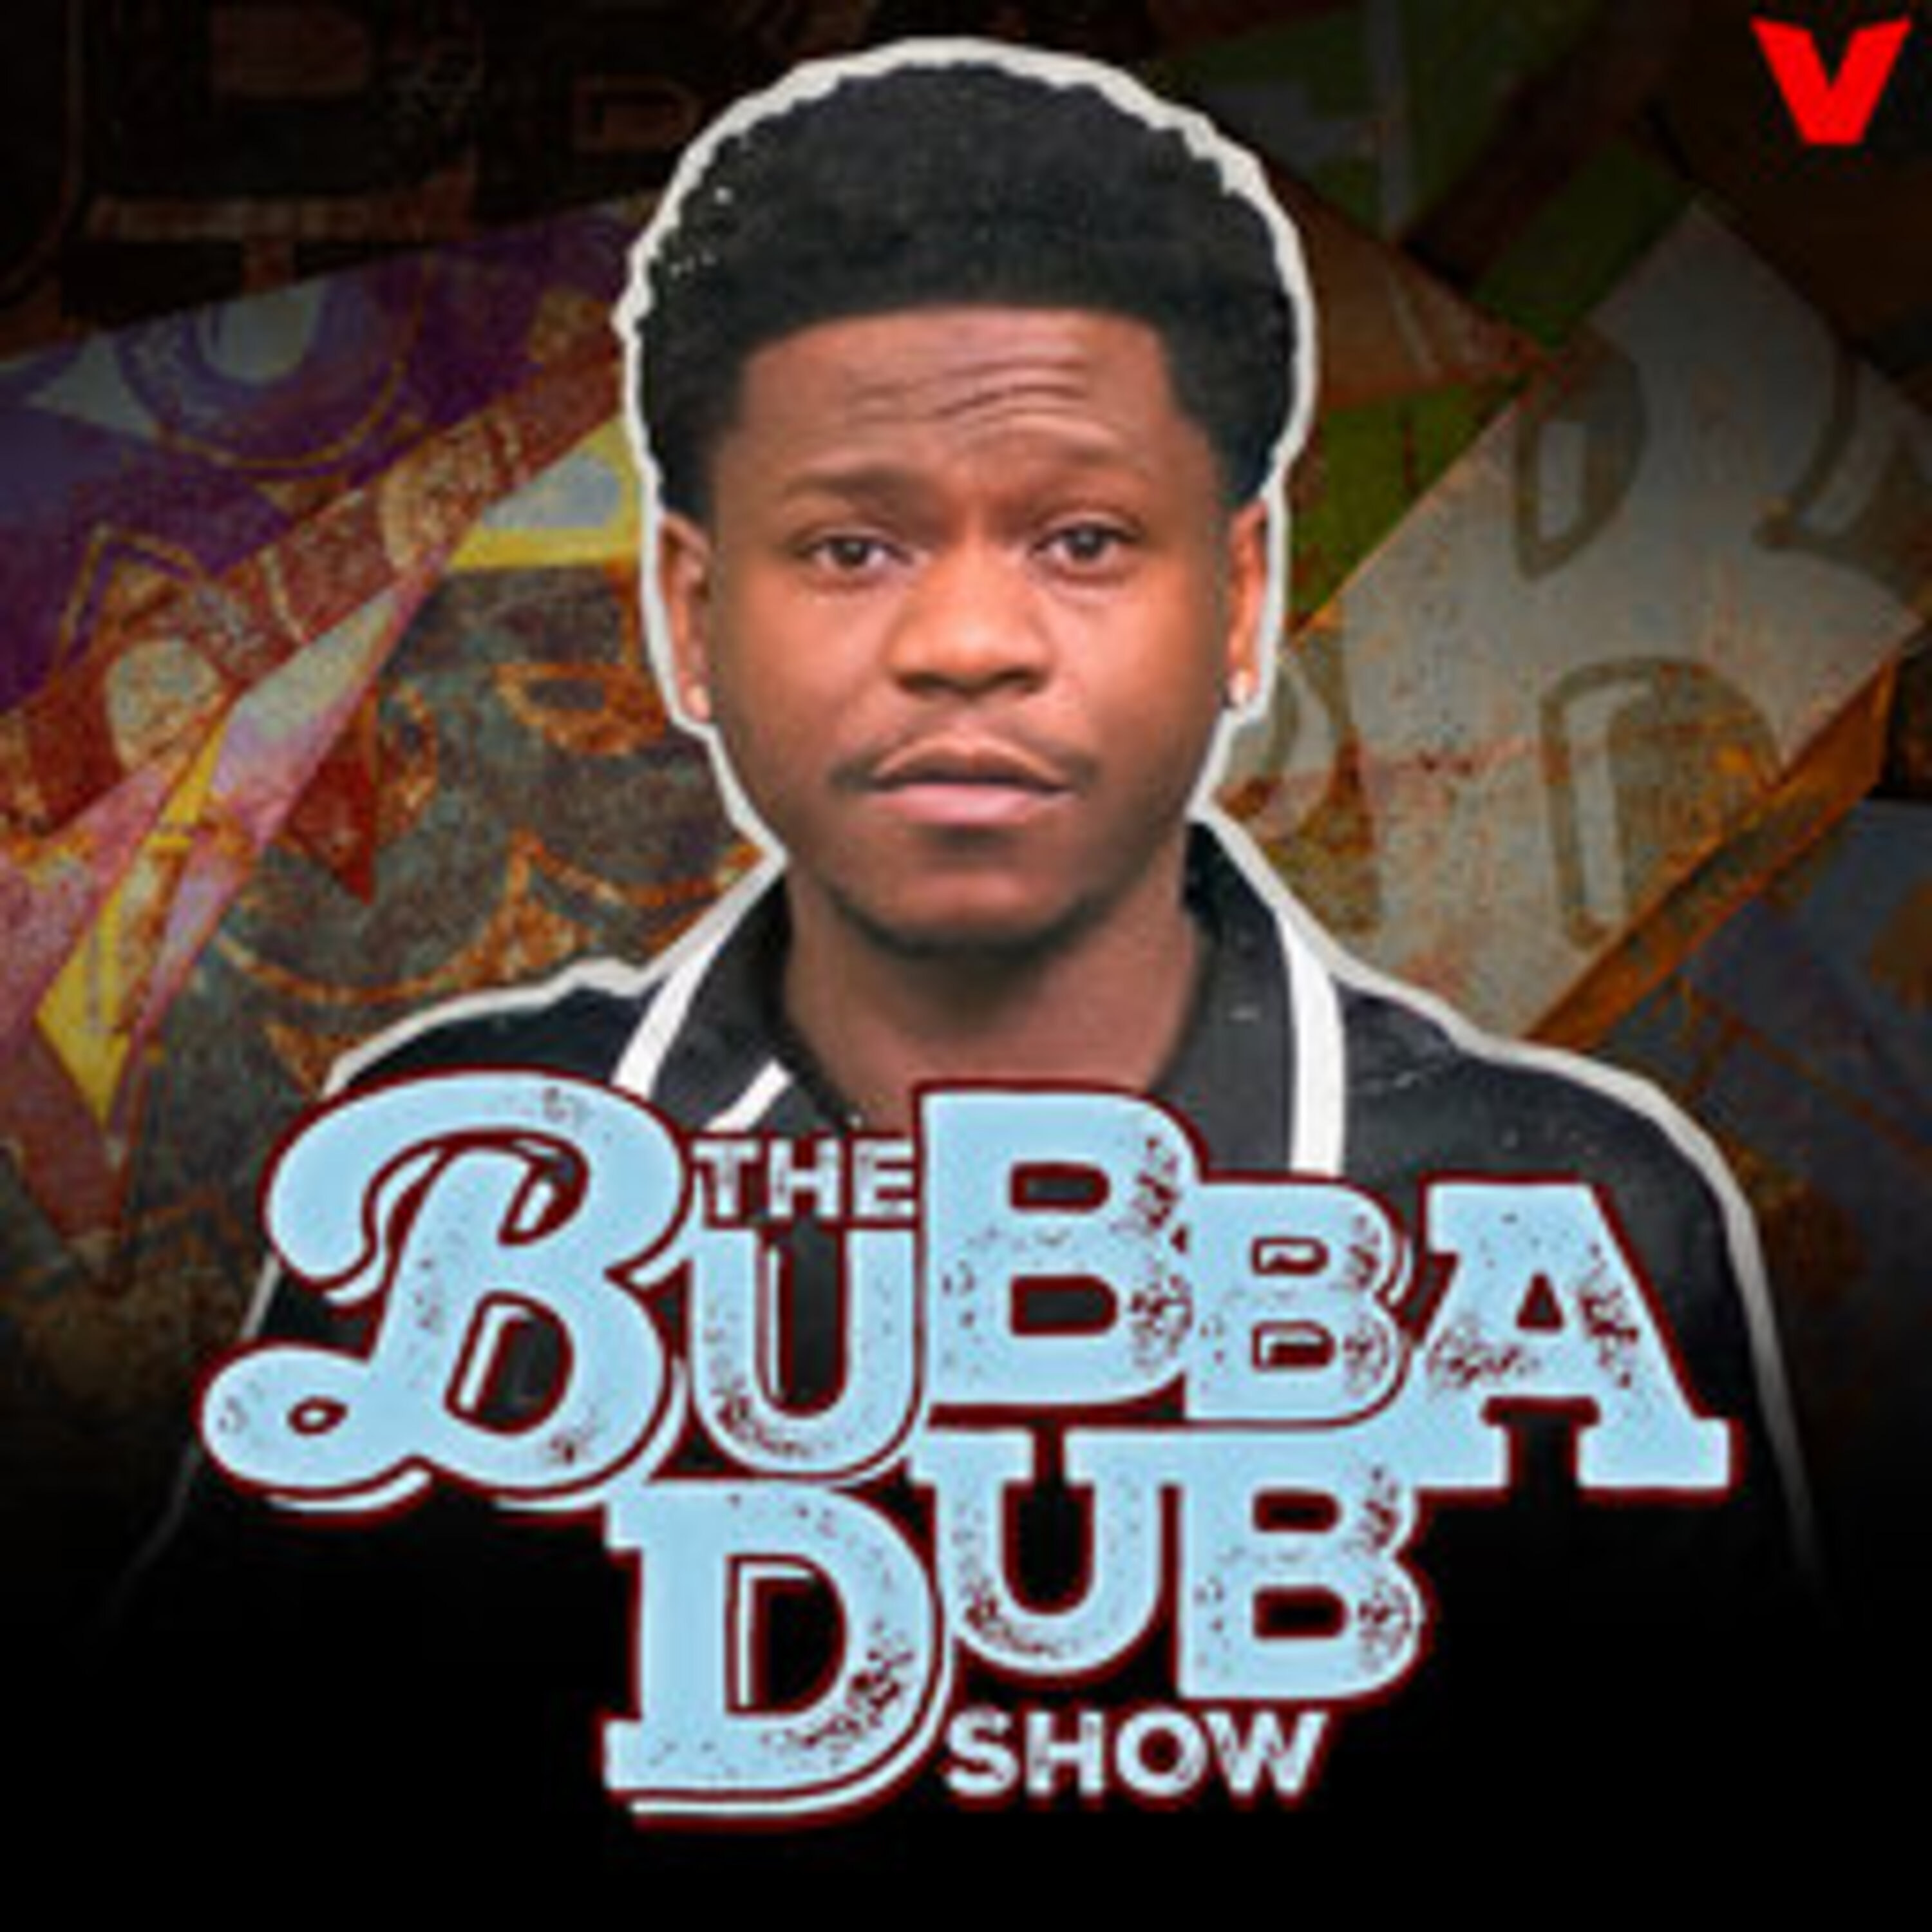 The Bubba Dub Show - Lakers Advance, Eastern Conference Play-In Preview, Jontay Porter Banned For Life, Trash of the Day by iHeartPodcasts and The Volume